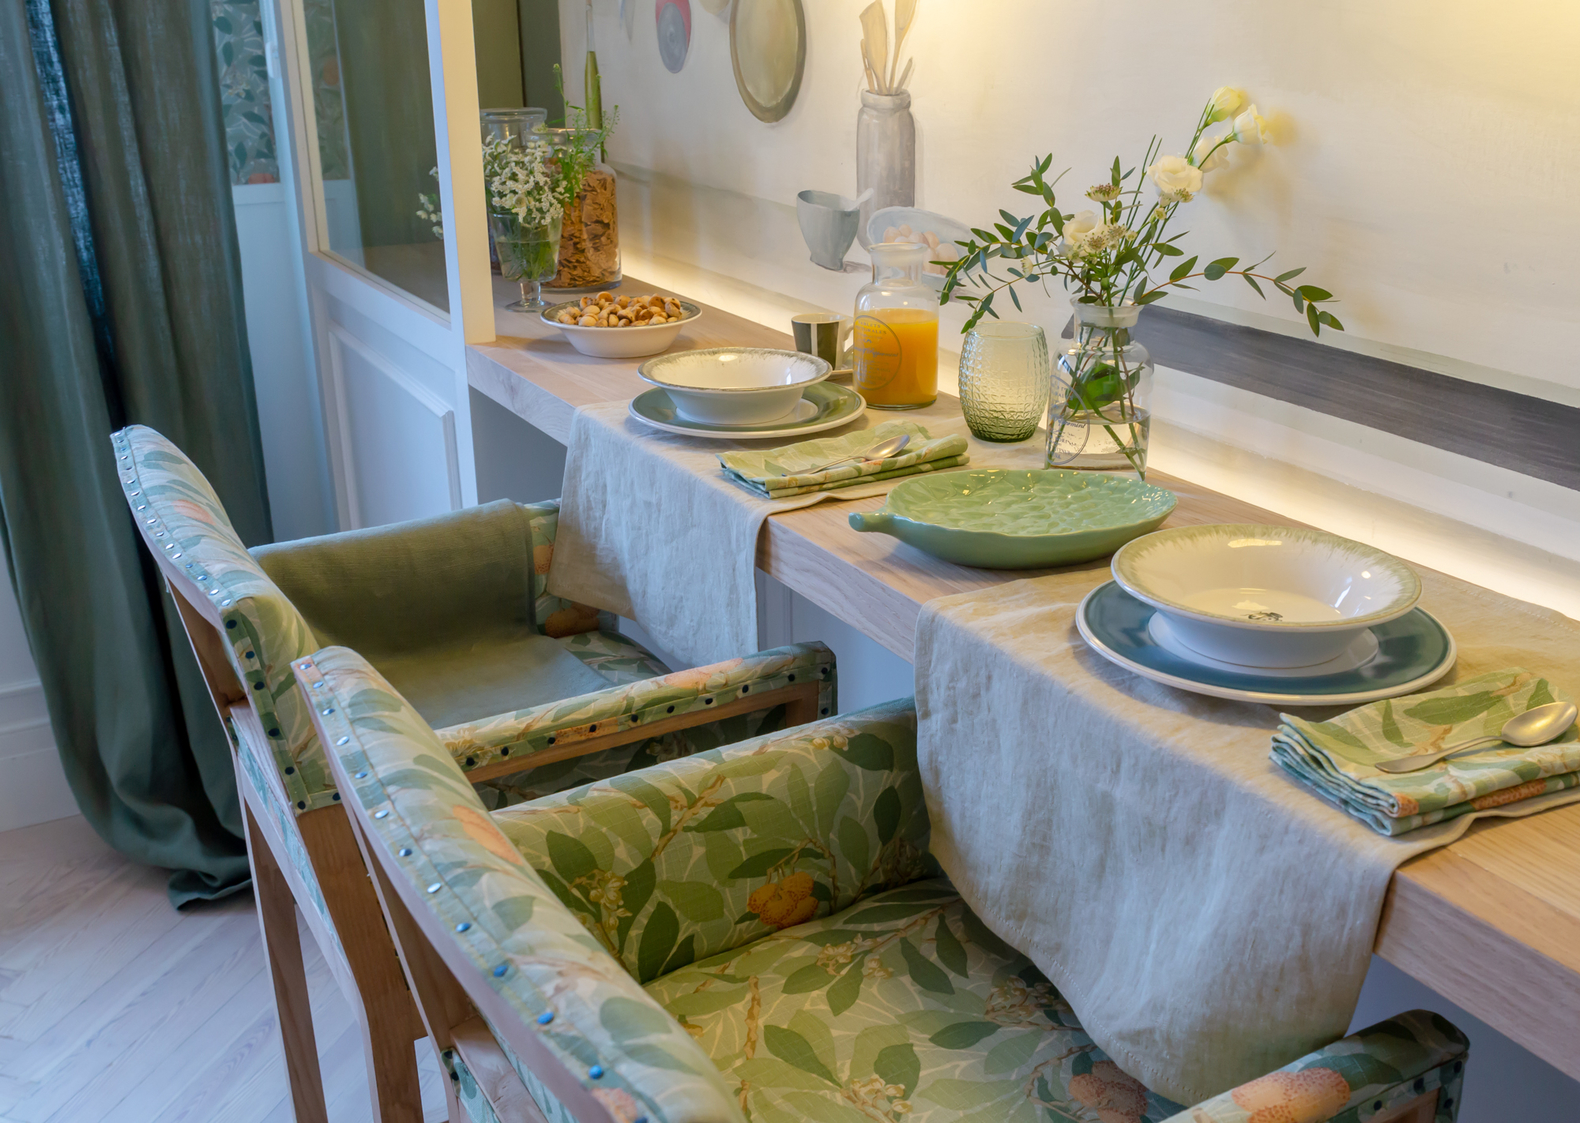 Green country style dining room by Asun Antó from Coton et Bois for Casa Decor 2019, Madrid